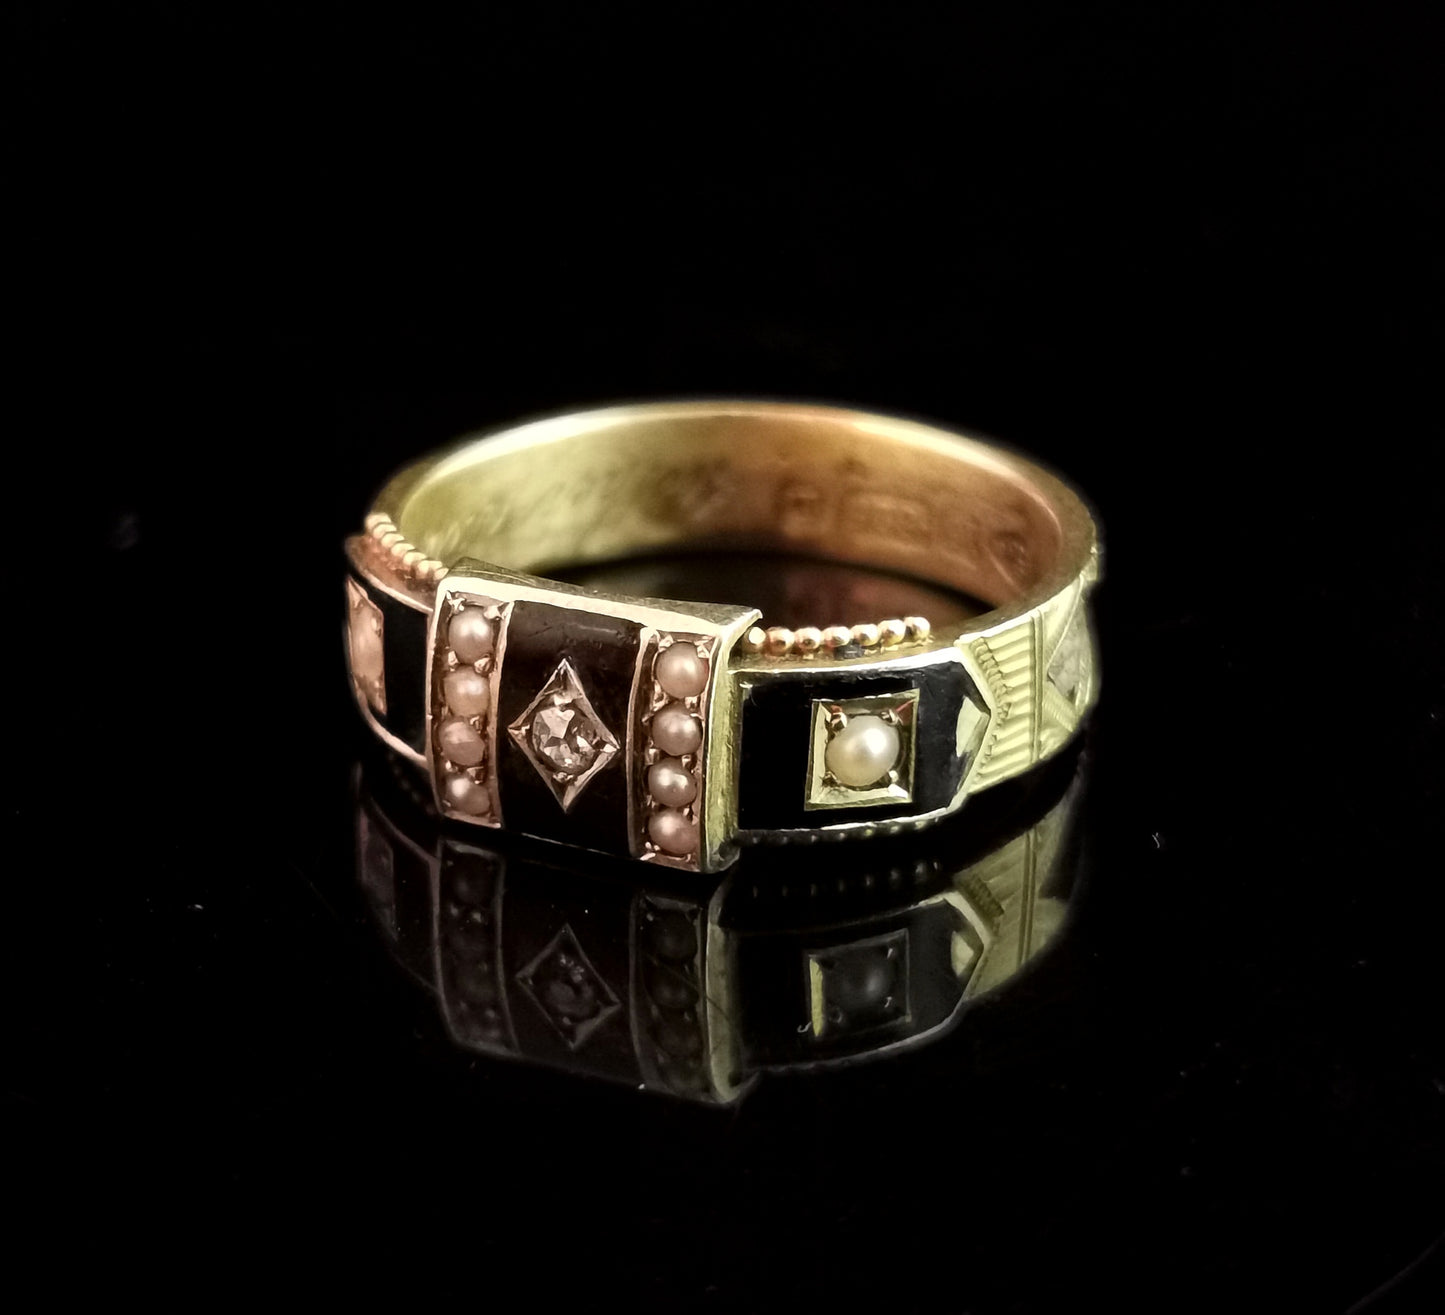 Victorian mourning ring, 15ct gold, pearl, black enamel and hairwork